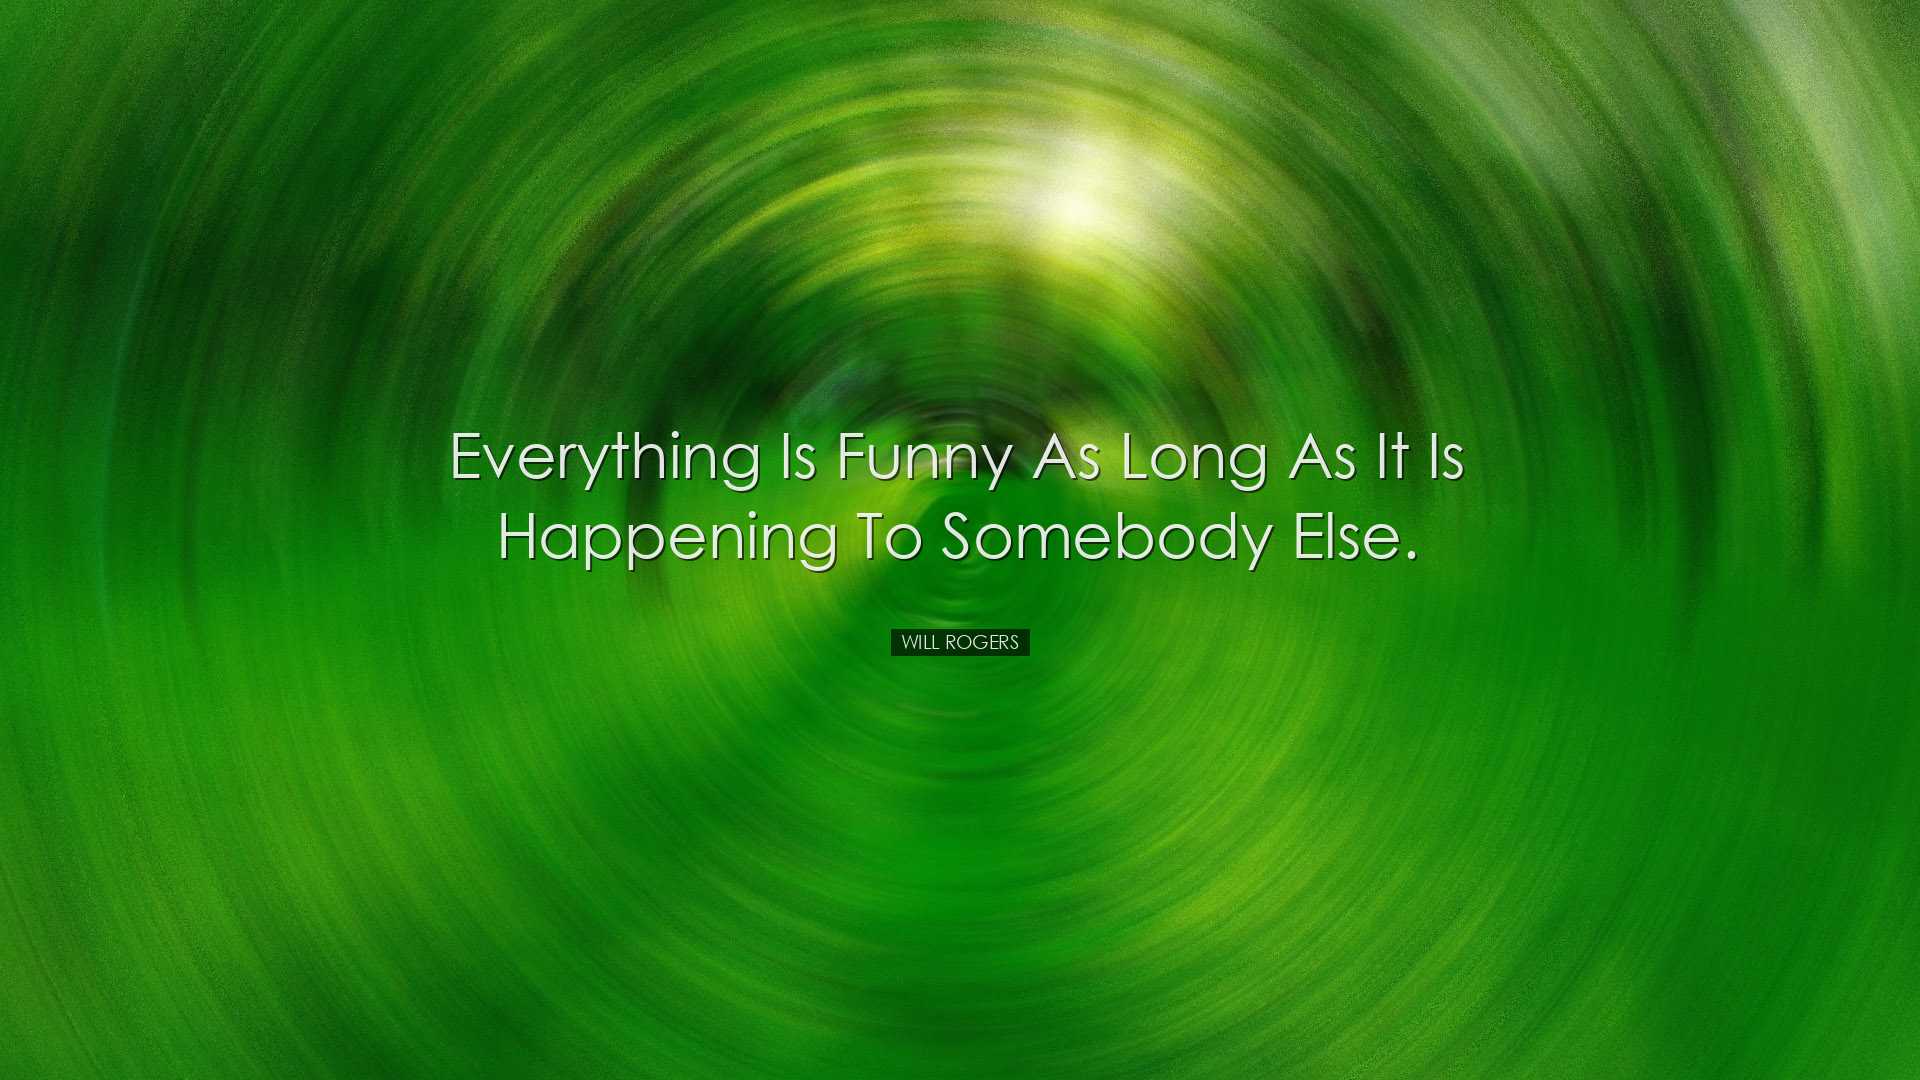 Everything is funny as long as it is happening to somebody else. -